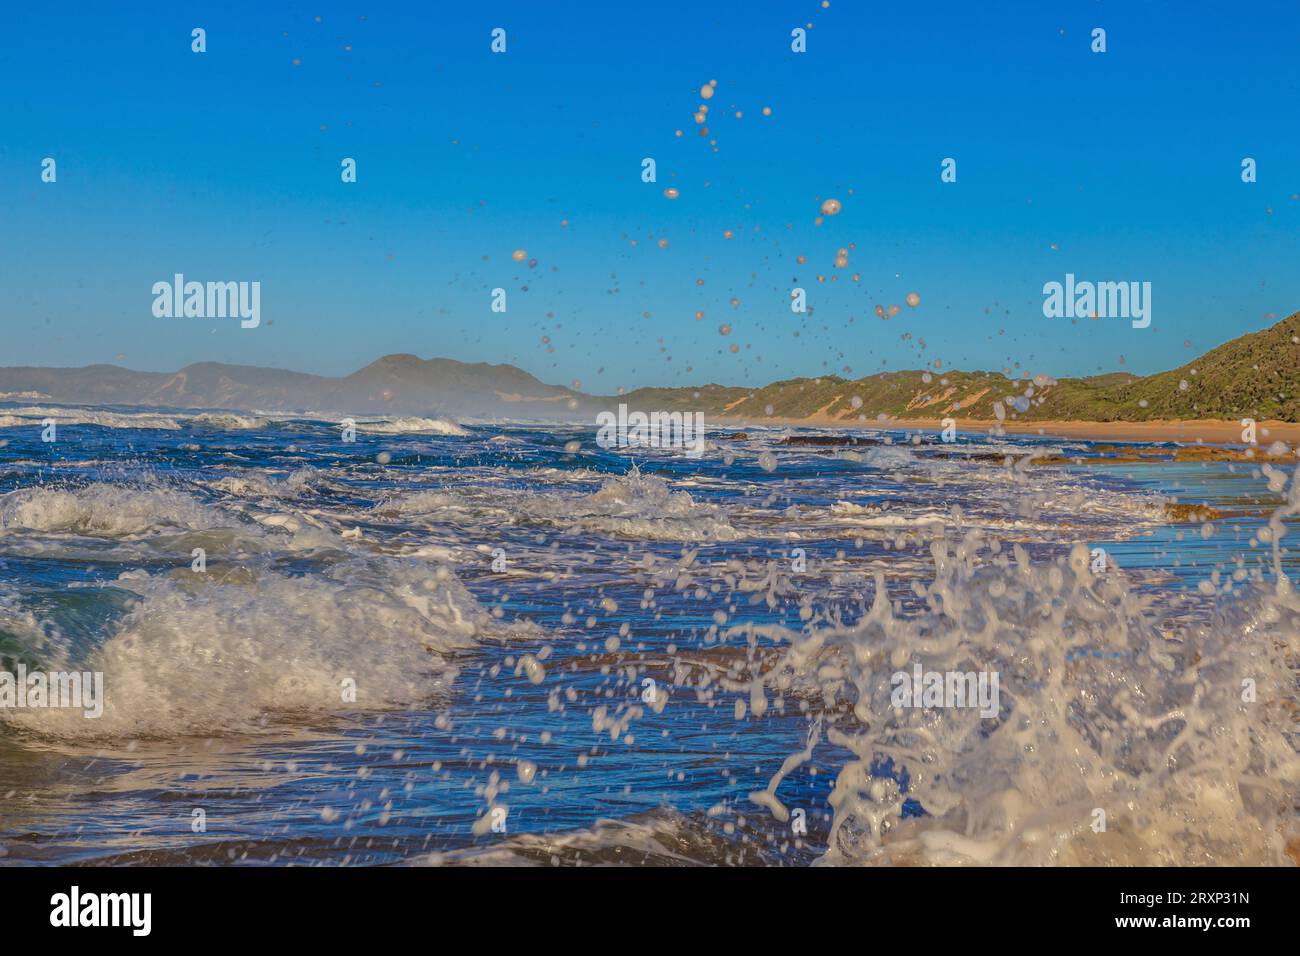 Footage of breaking waves with splashing water in the foreground photographed from a ground-near position in the morning at Brenton Beach in South Afr Stock Photo